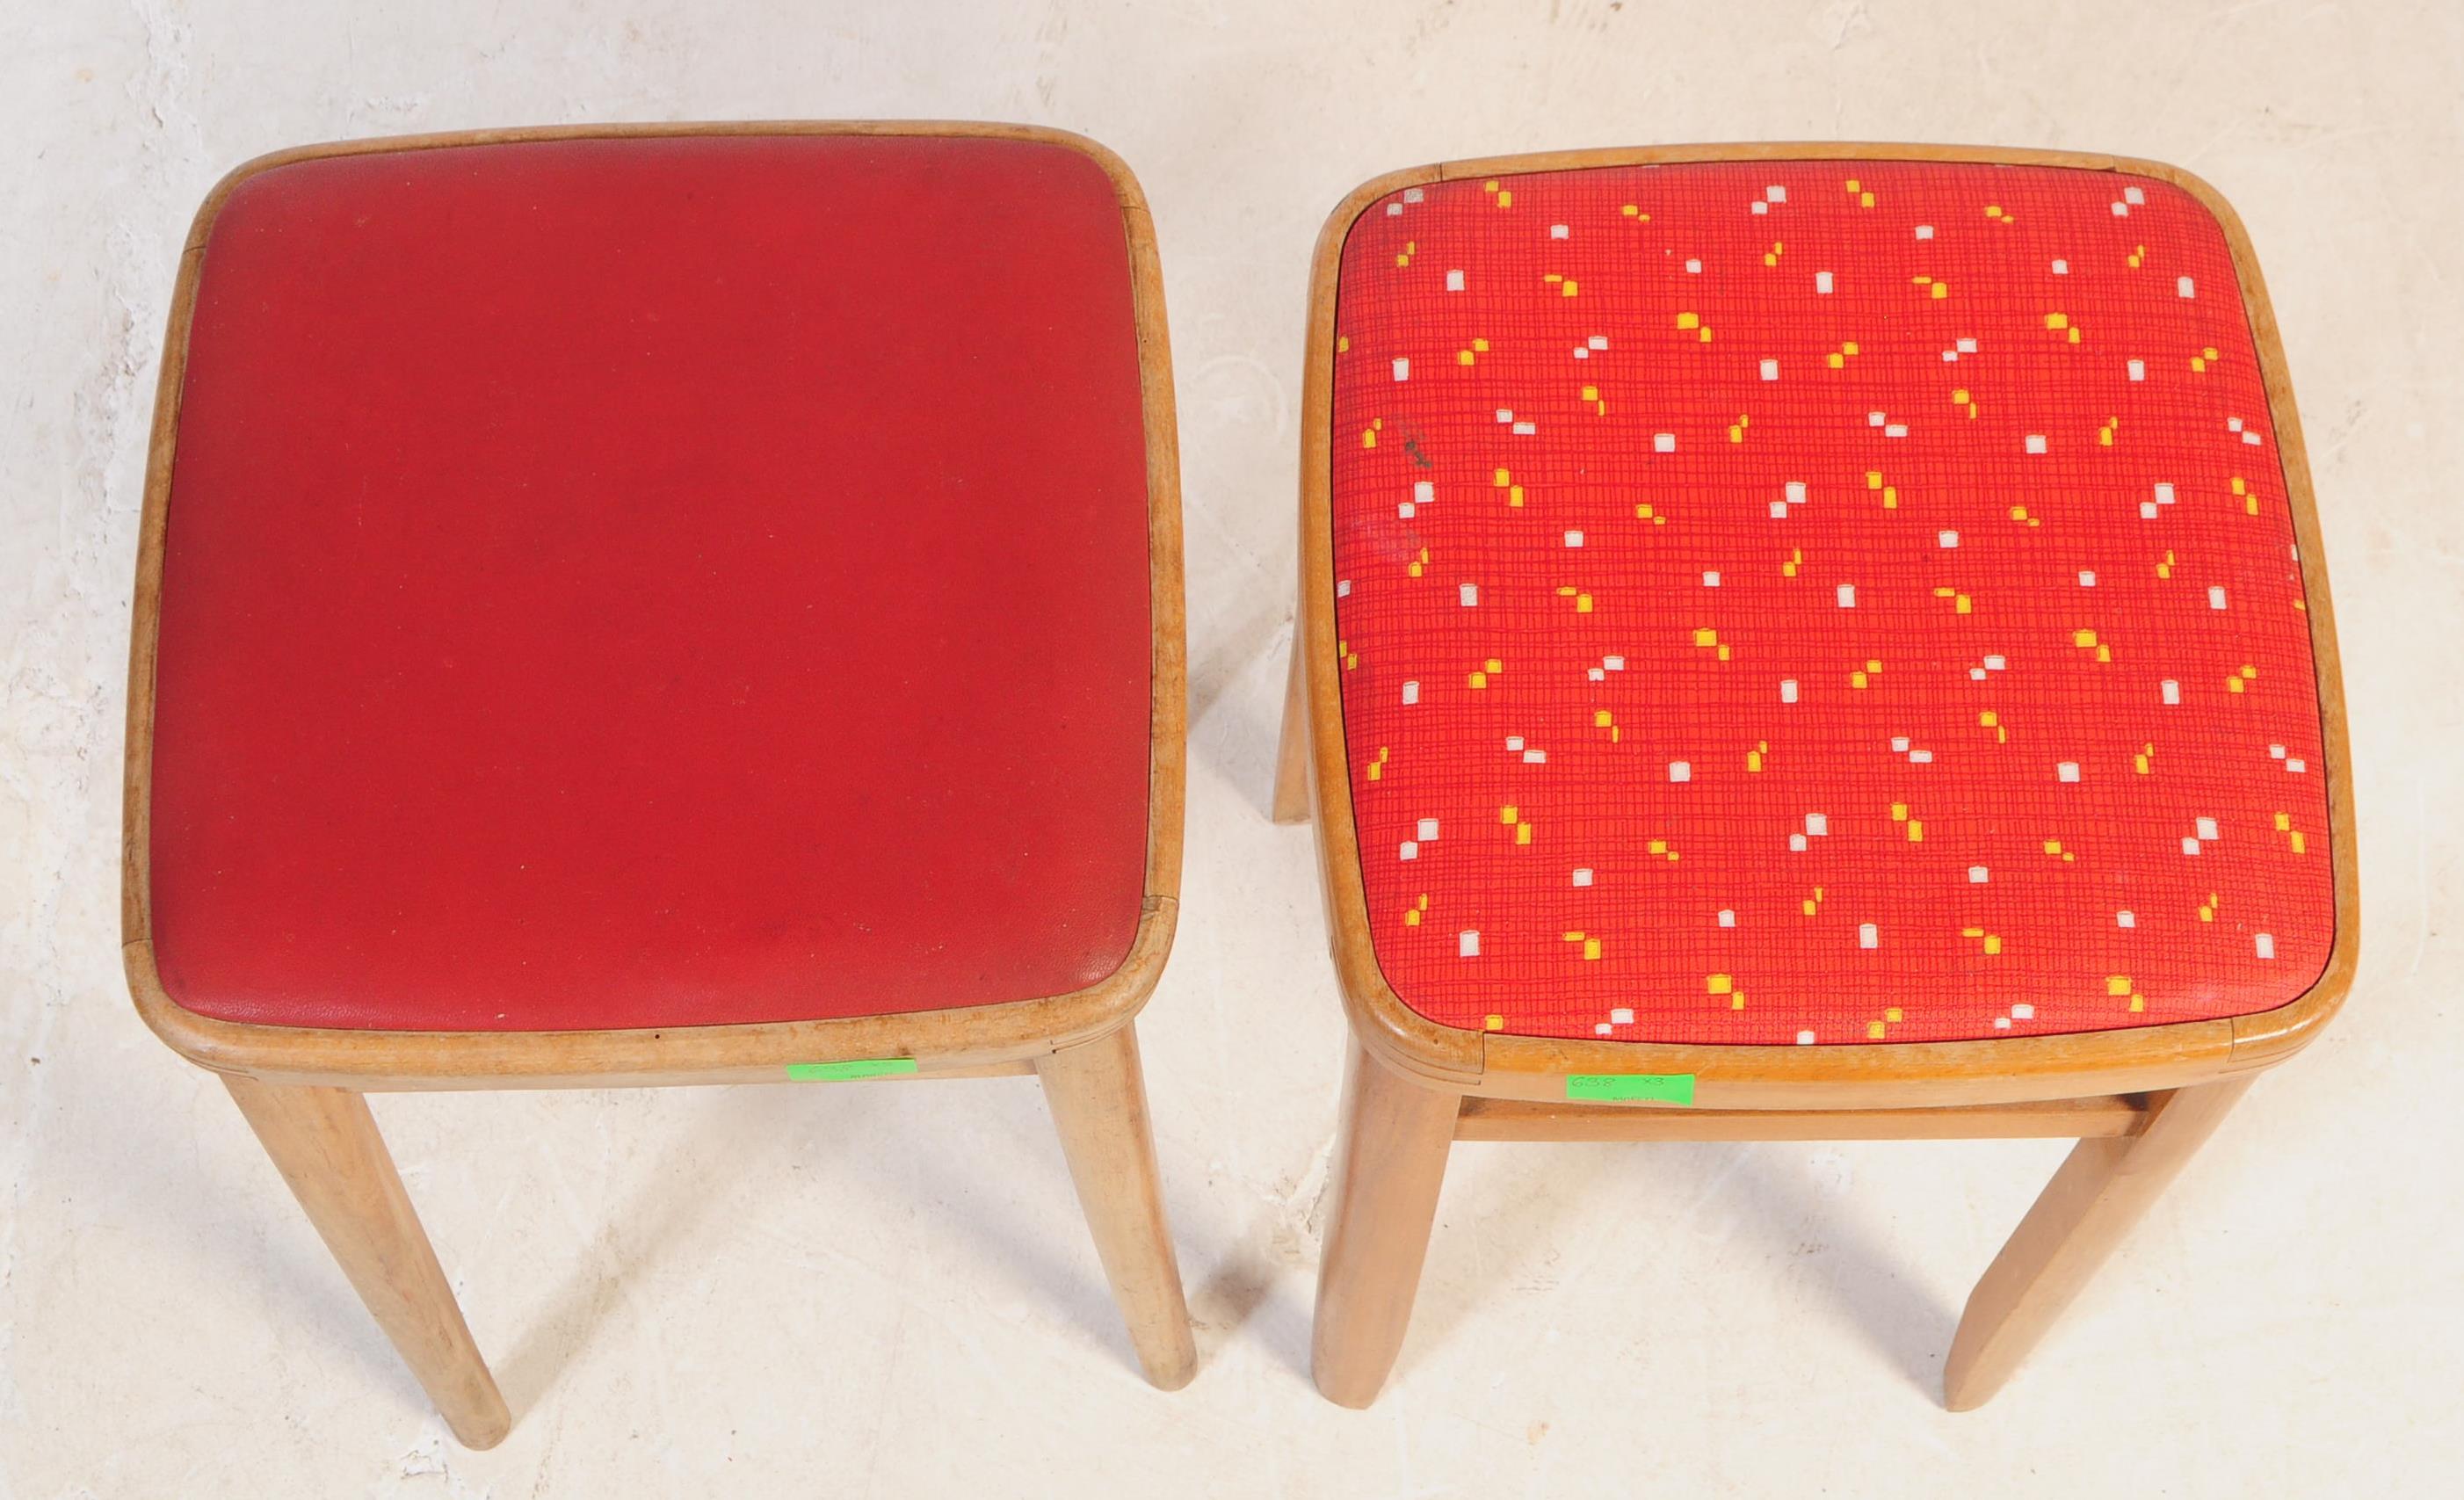 MID 20TH CENTURY FORMICA KITCHEN TABLE AND STOOLS - Image 13 of 18